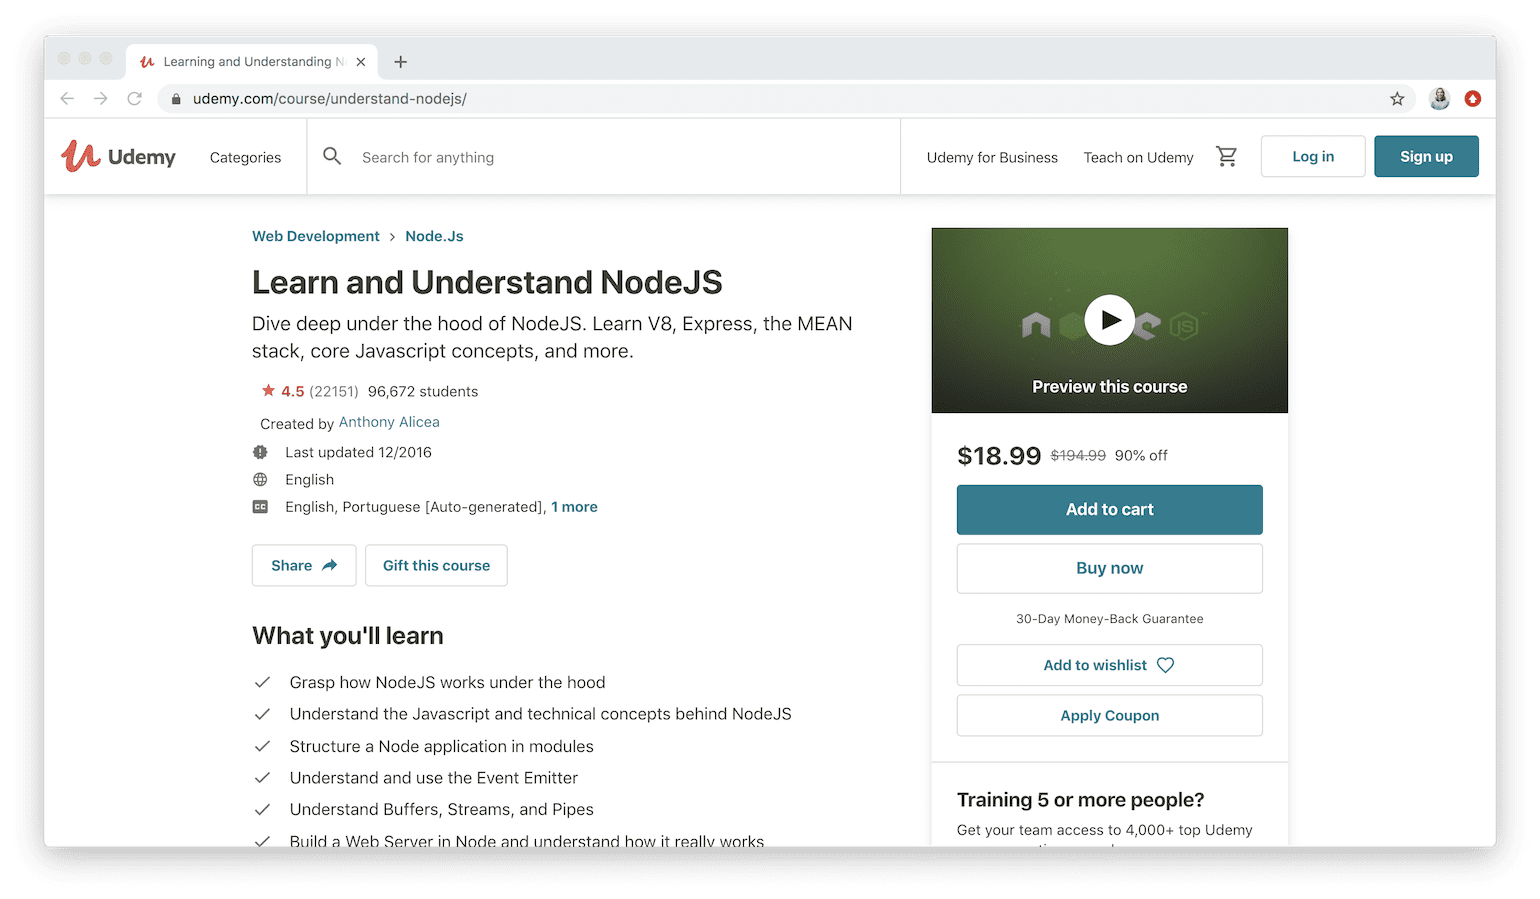 Learn and Understand NodeJS on Udemy